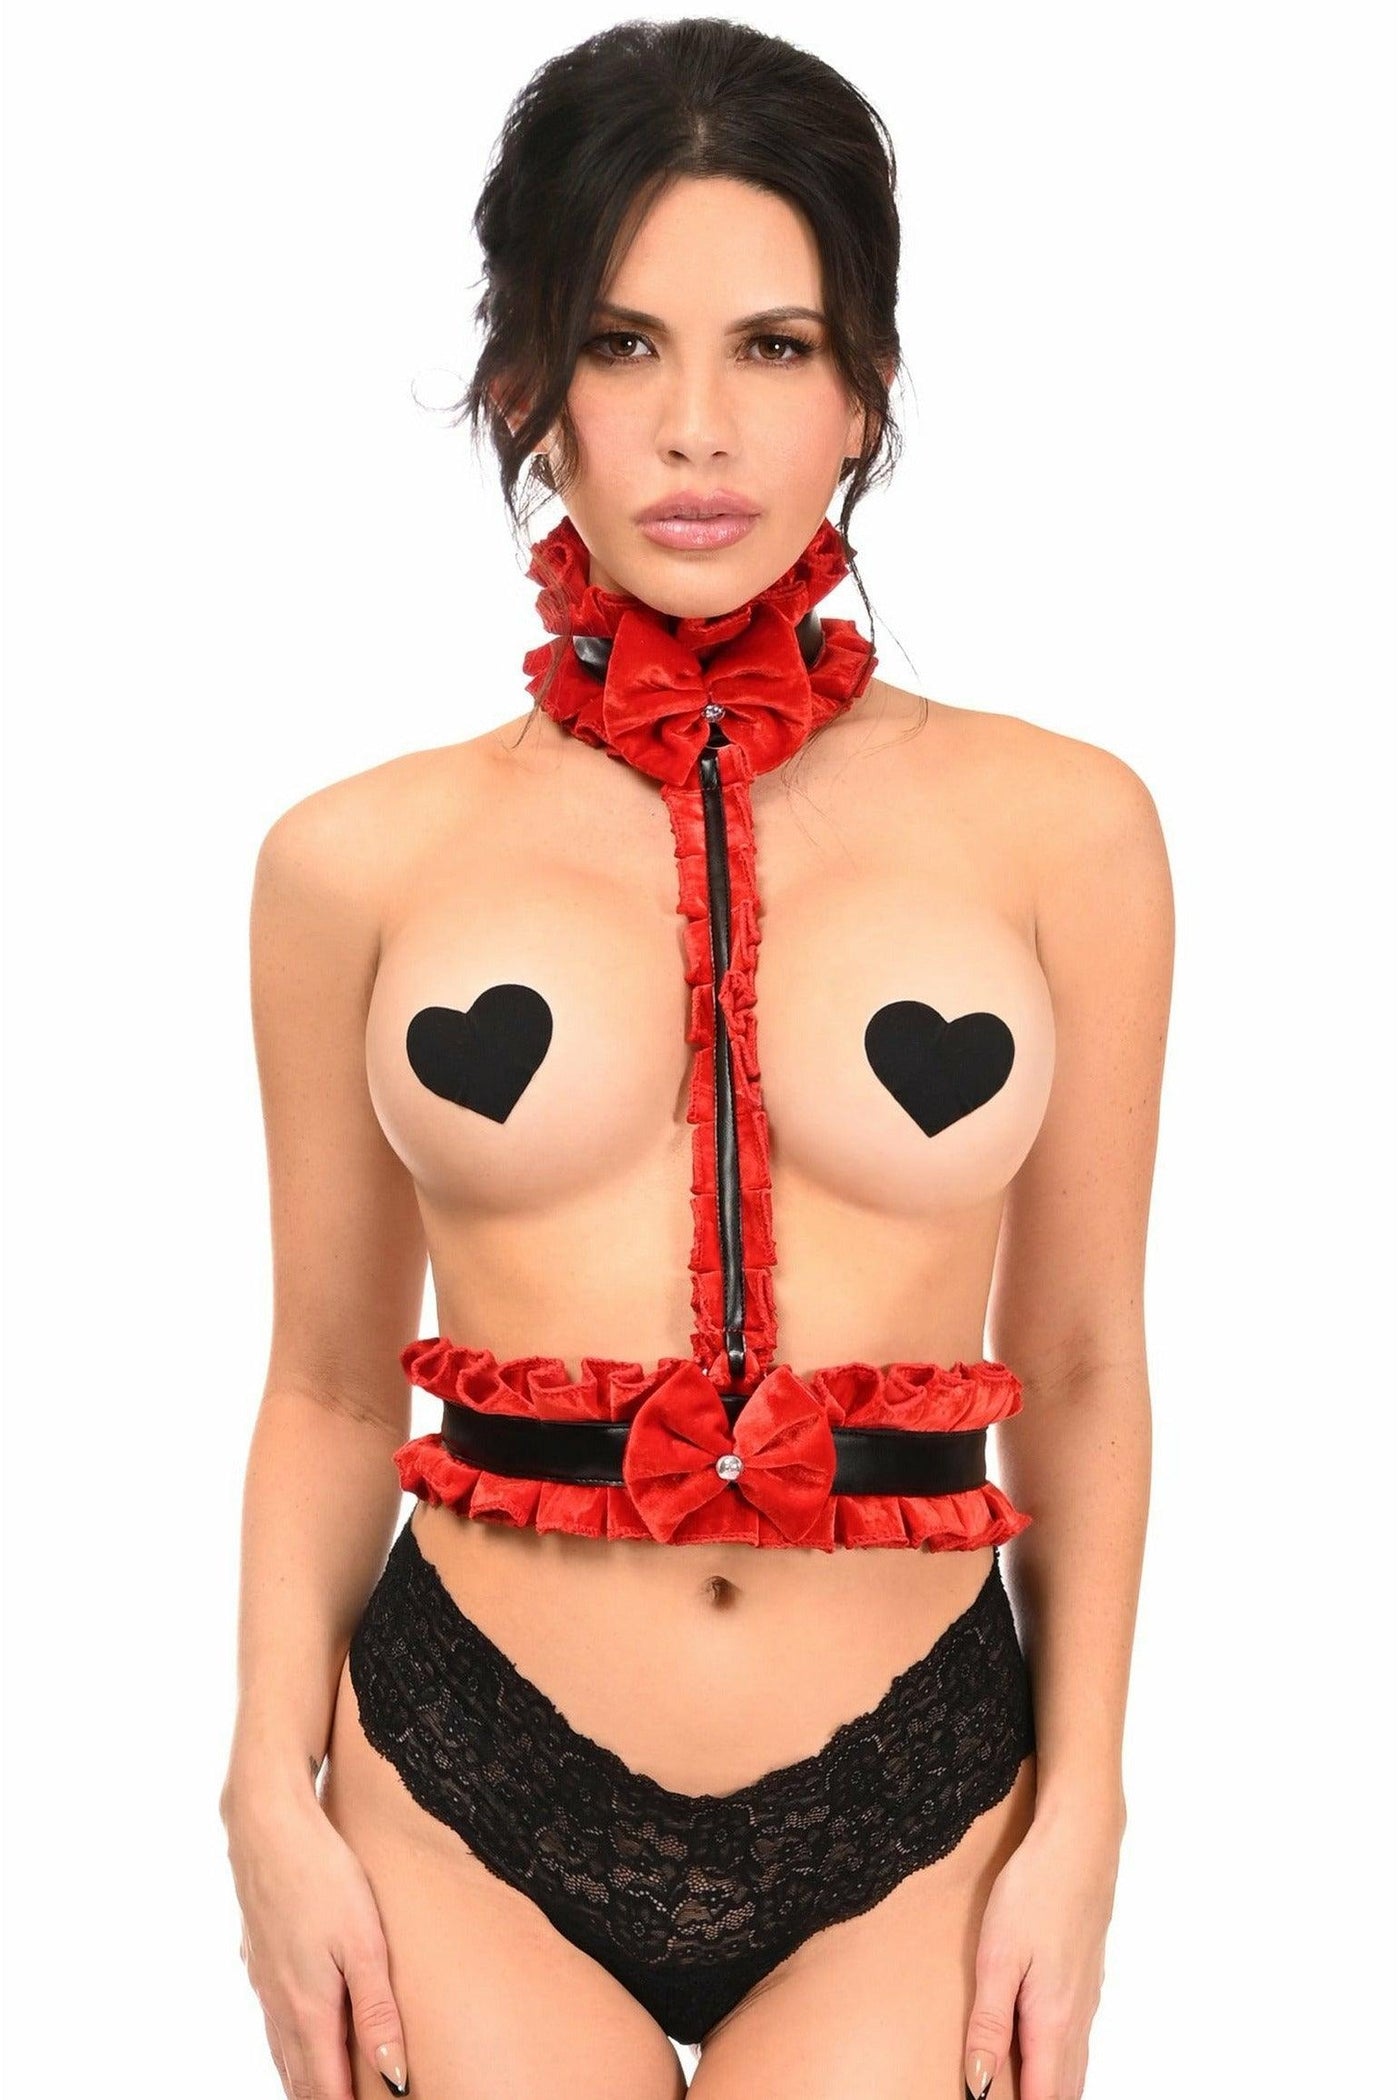 Kitten Collection Red Velvet & Faux Leather Single Strap Body Harness - Daisy Corsets